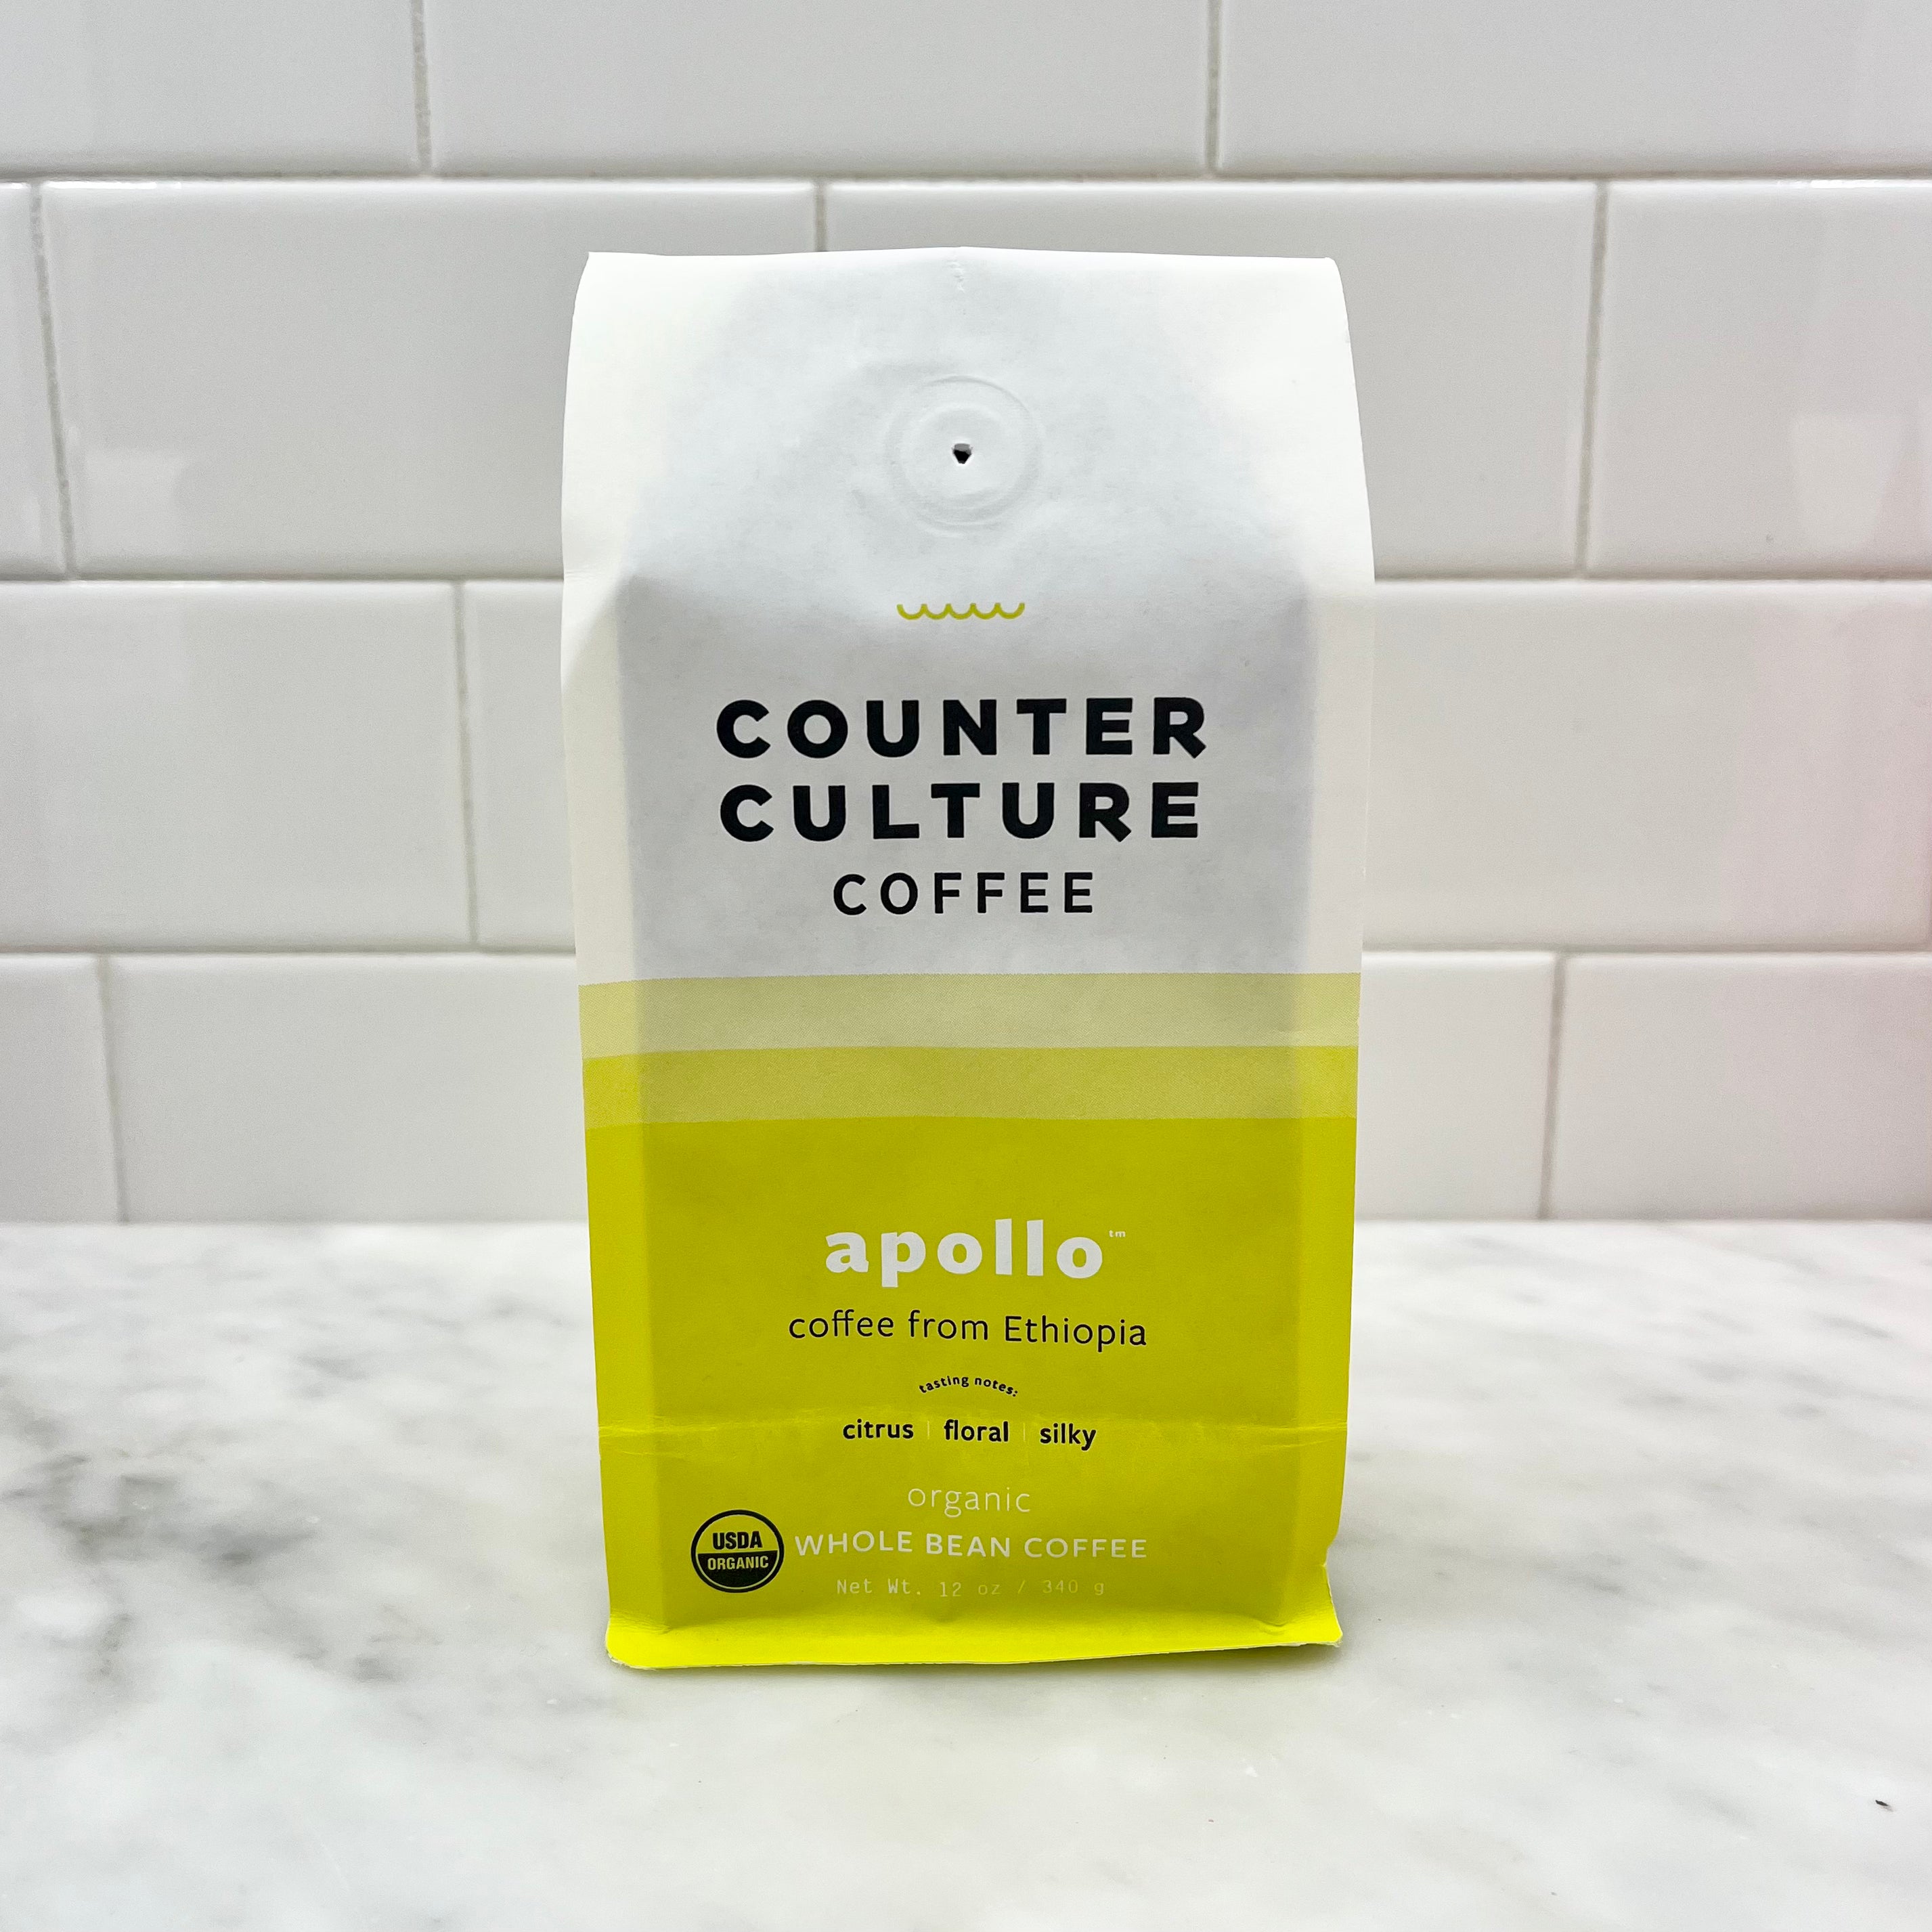 A bag of Counter Culture Coffee on a marble countertop.